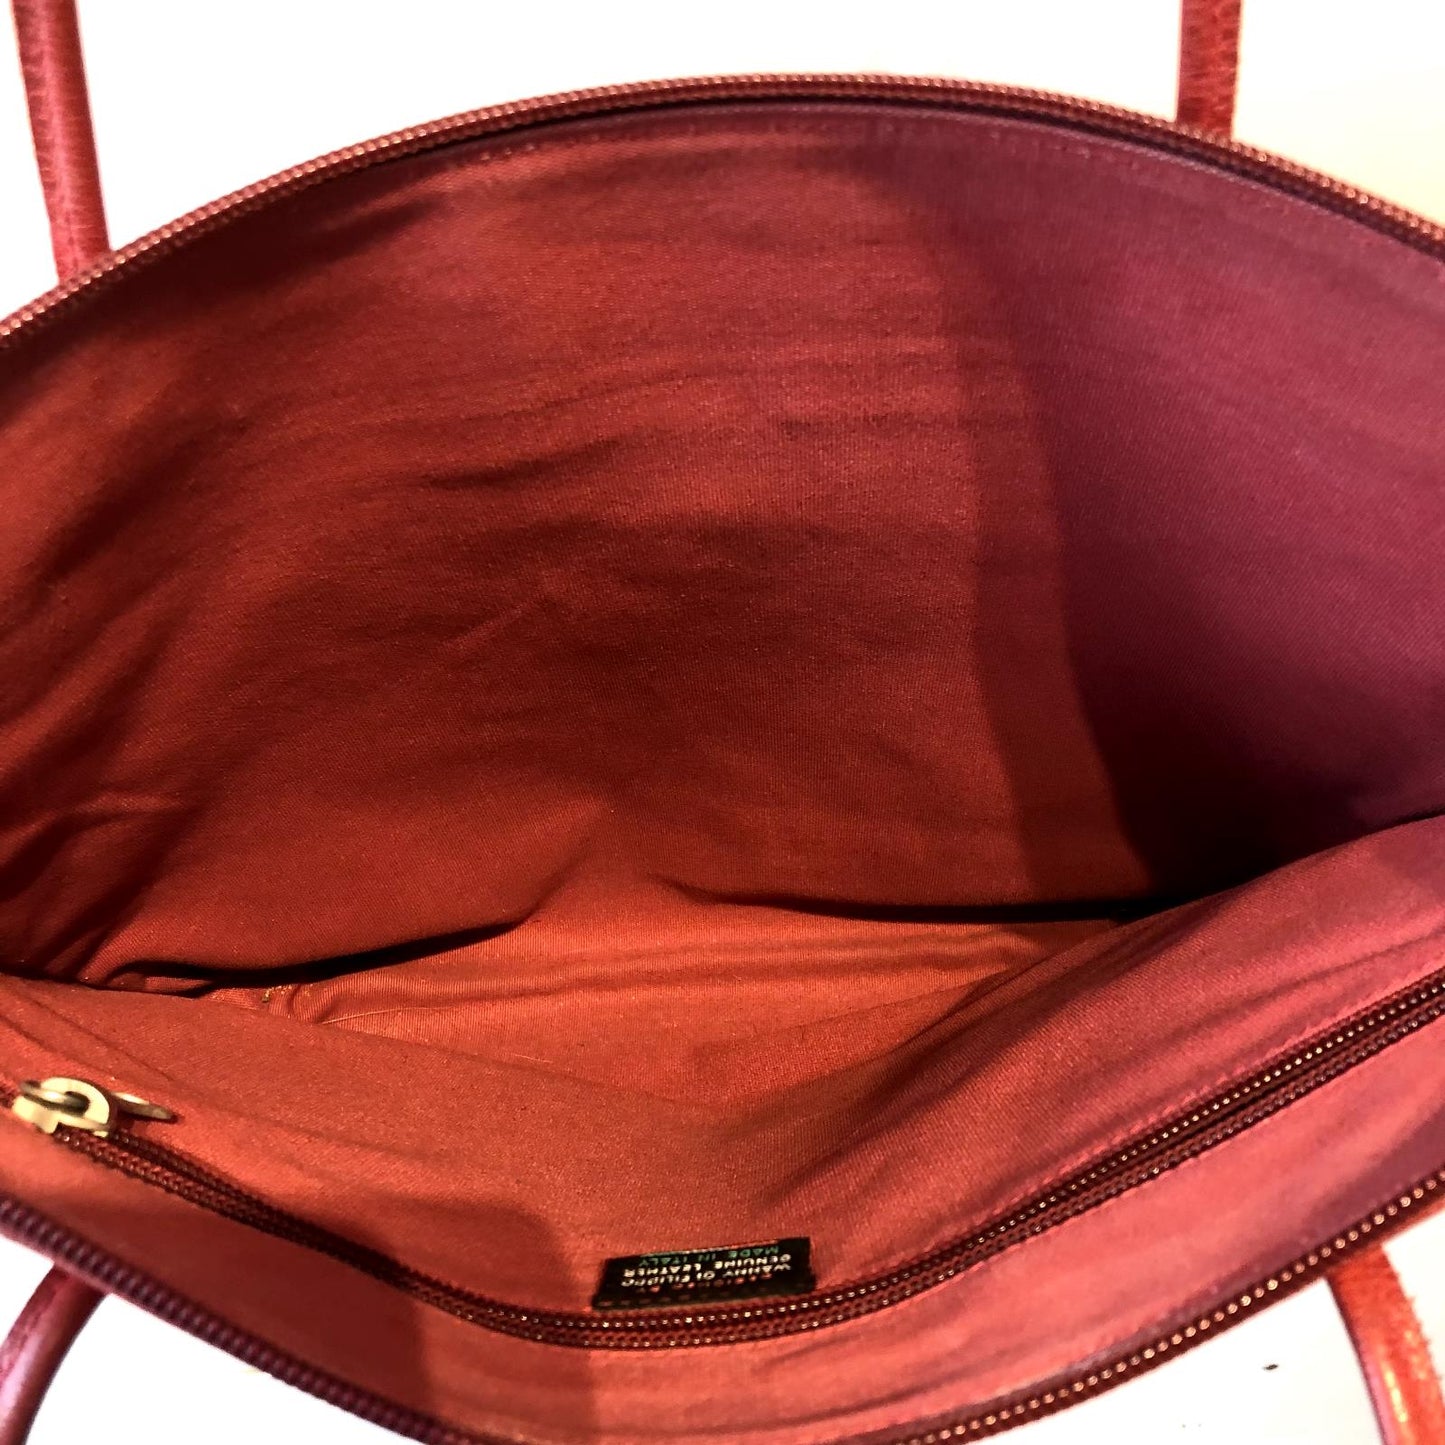 Il Bisonte Red Leather Made In Italy Zip Top Shoulder Bag Tote Purse 0914LH